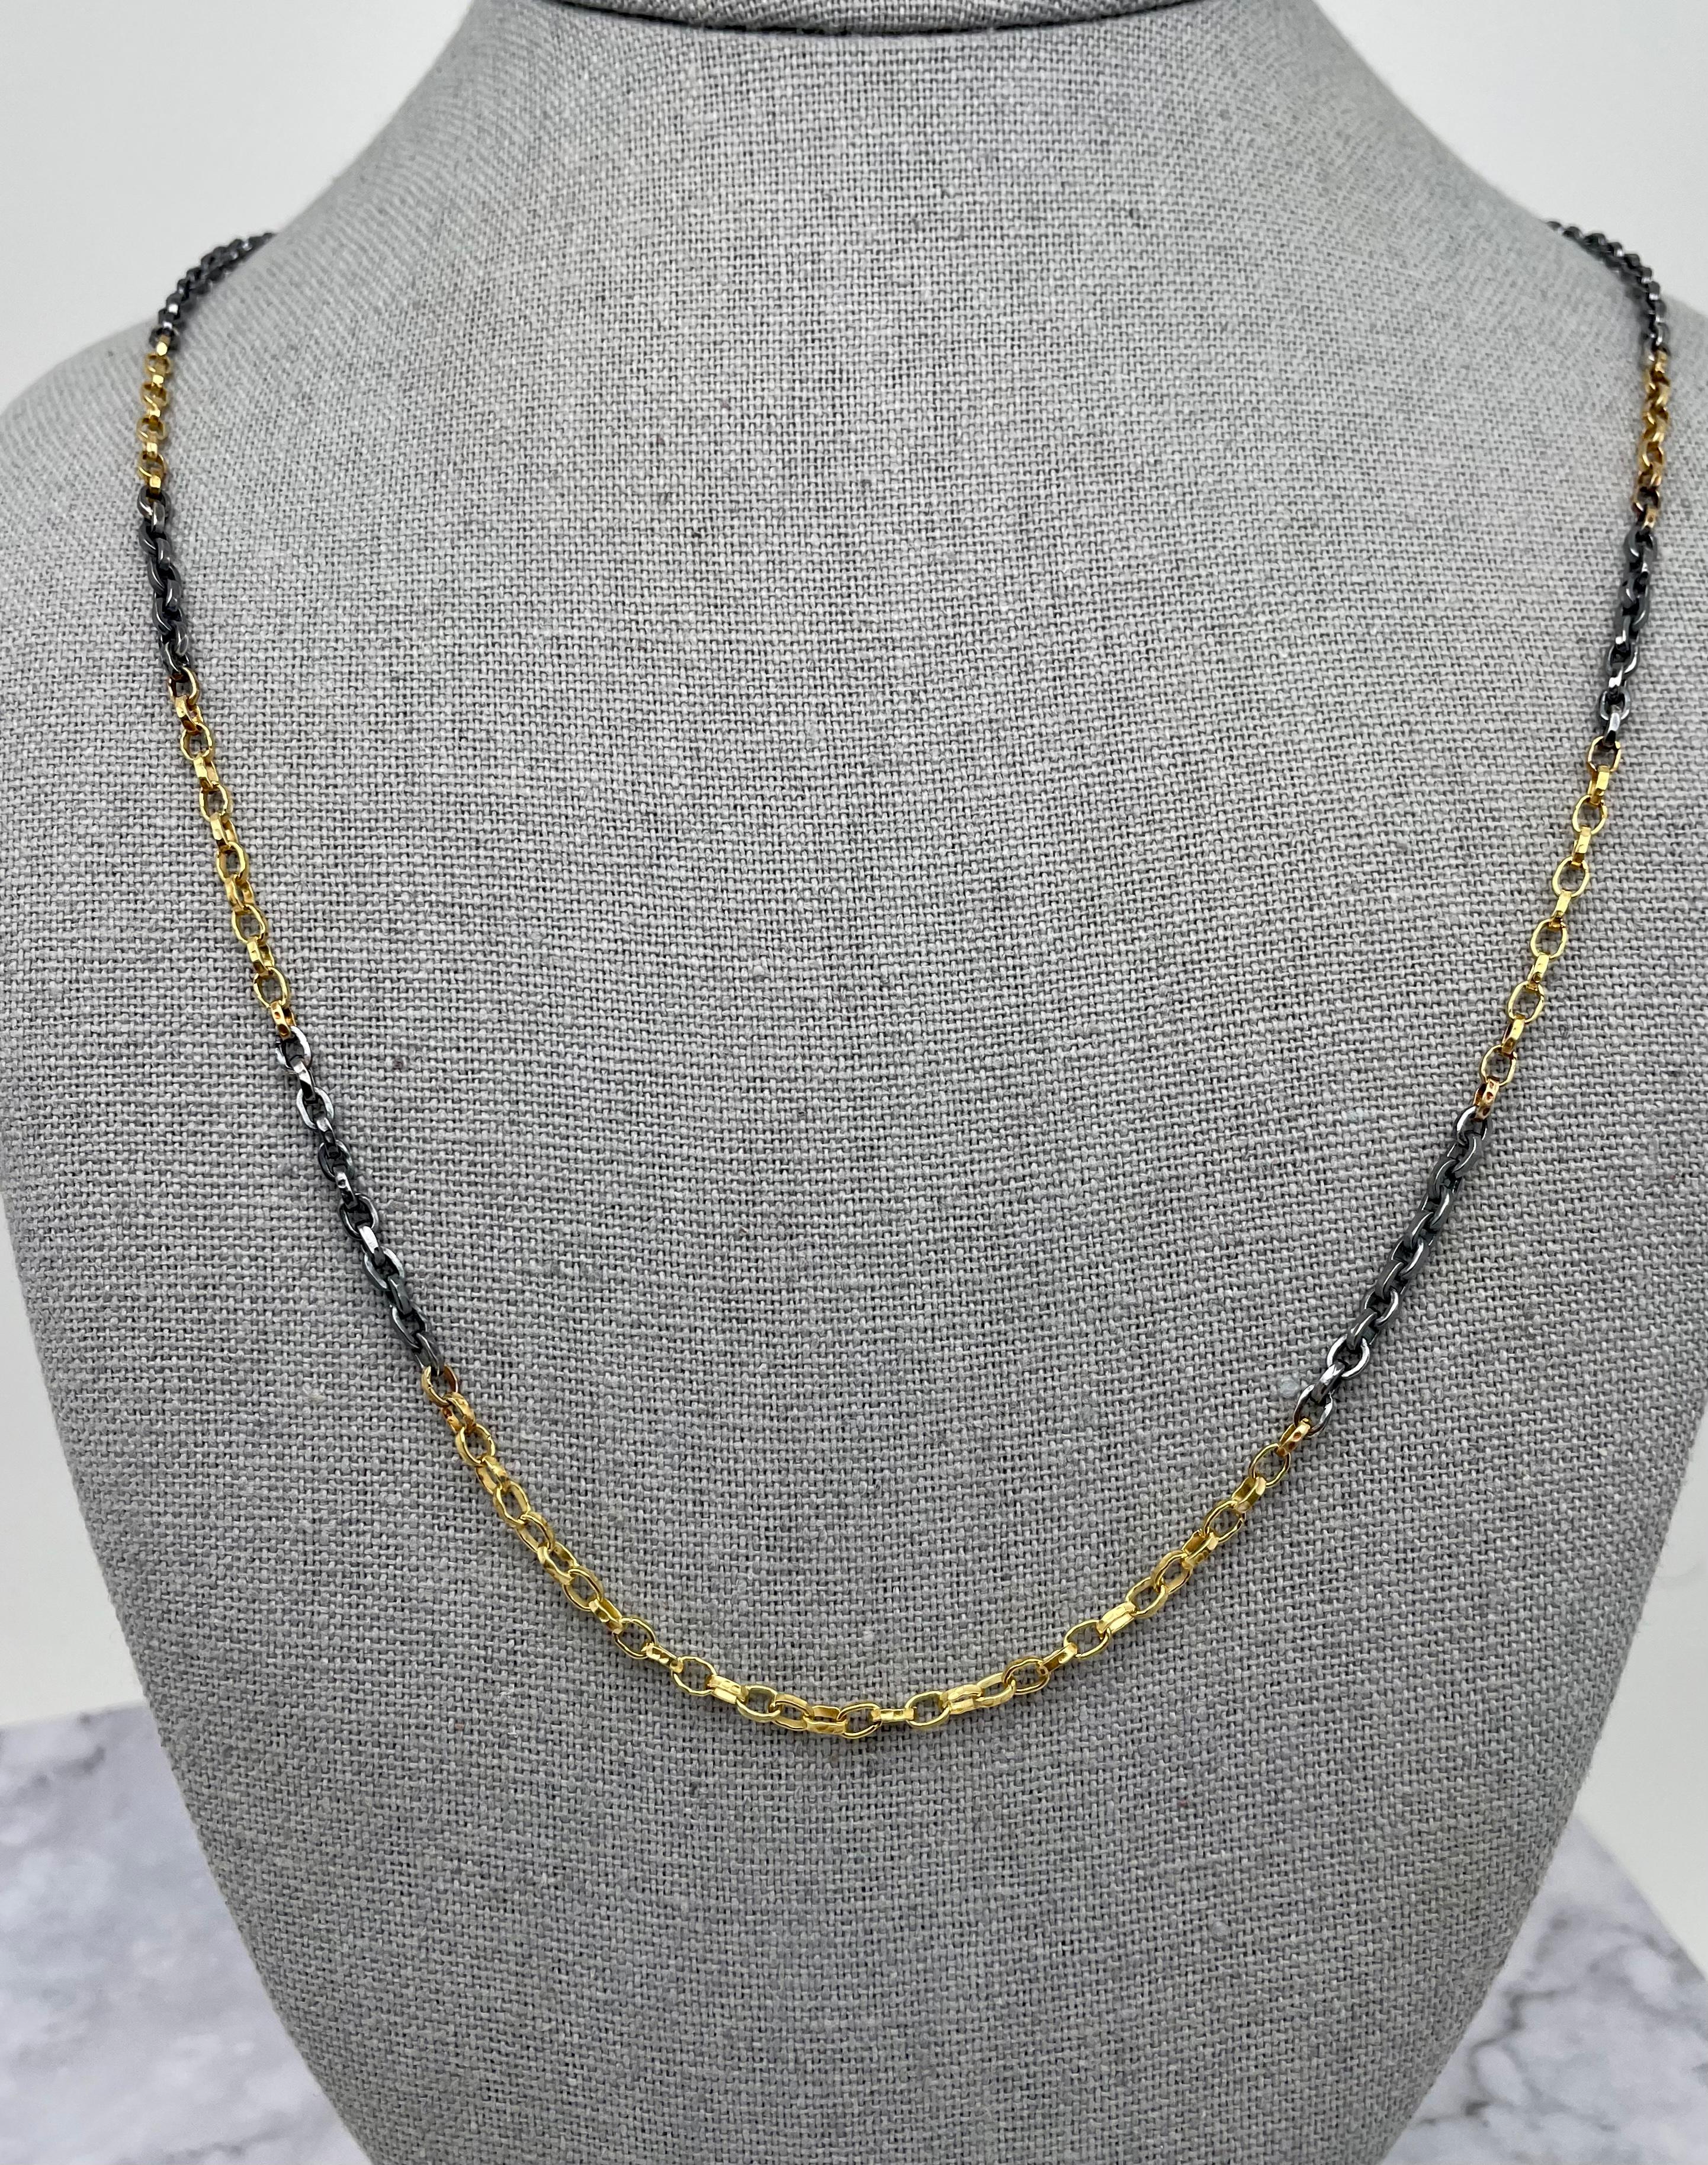 Contemporary Steven Battelle Handmade Hammered Mixed 18K Gold Oxidized Silver Chain